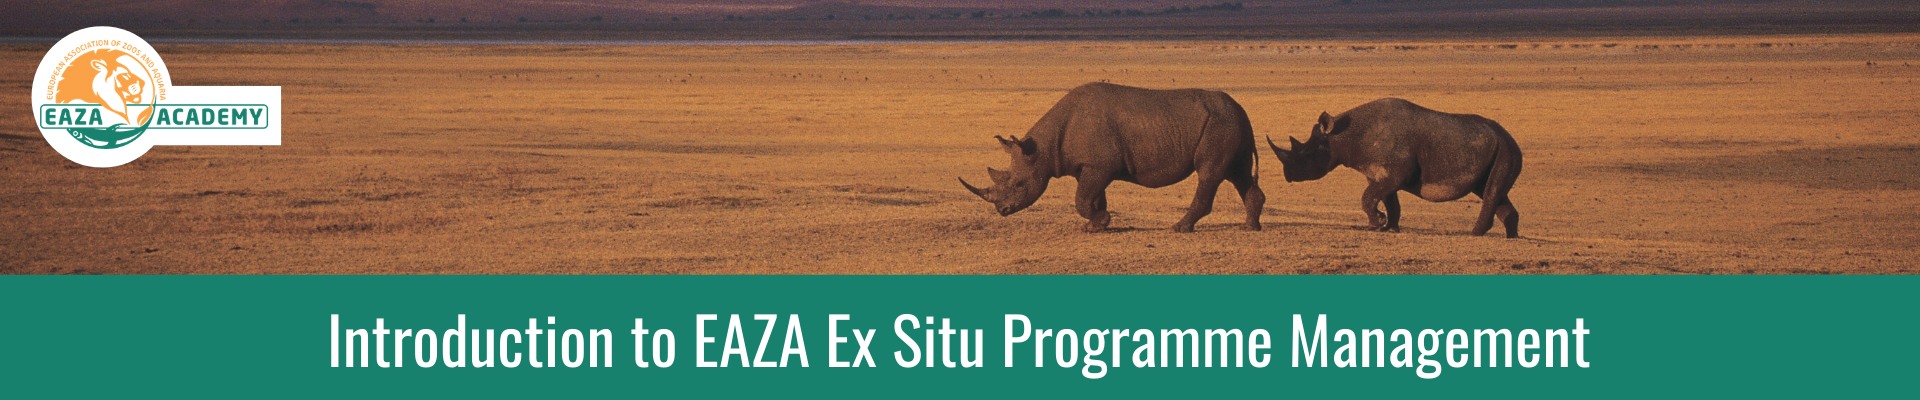 Introduction to EAZA Ex situ Programme Management_February